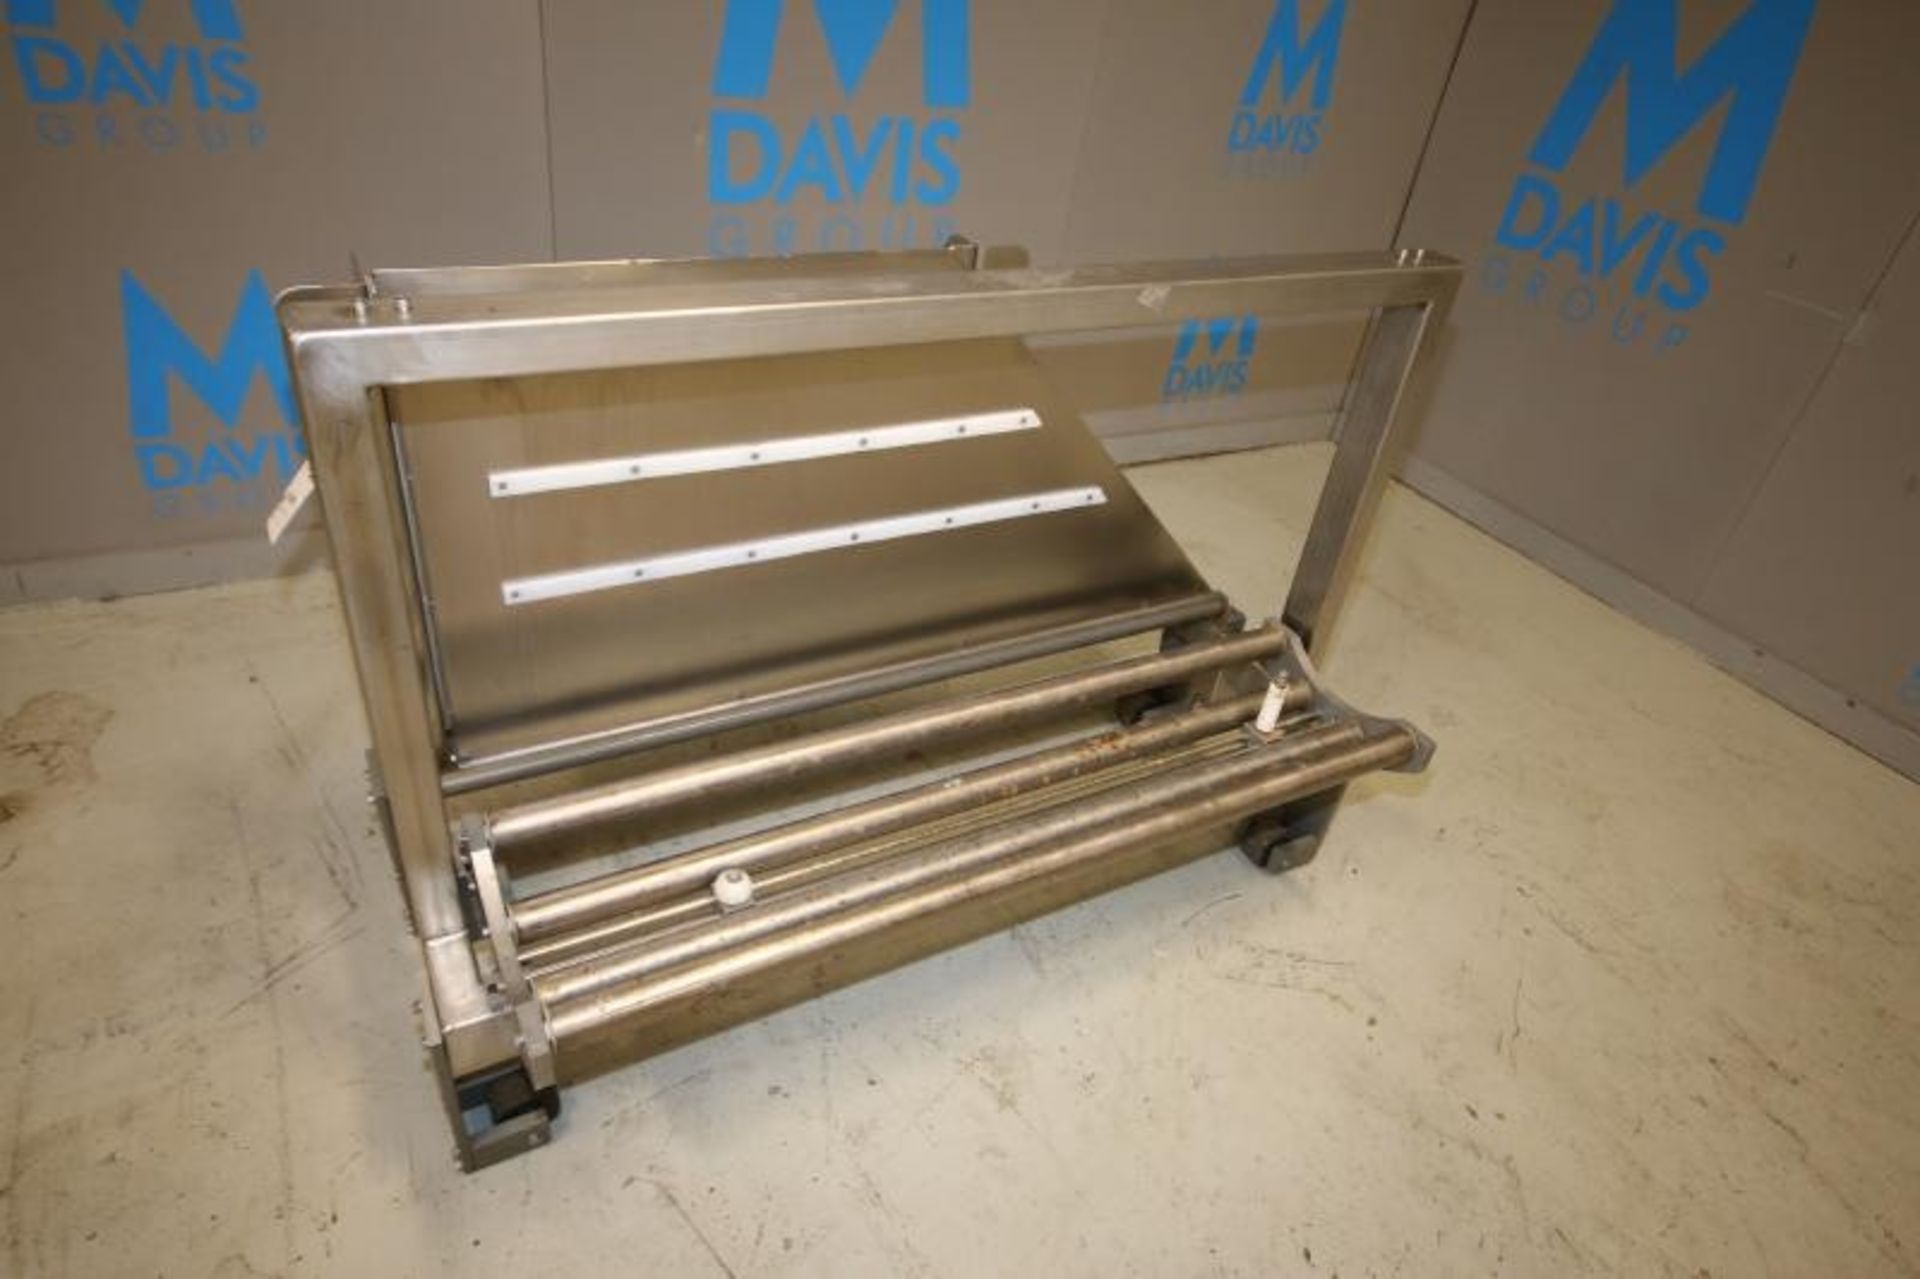 S/S Rack with Rollers, 55" L x 27" W x 41" H, Mounted on Wheels (INV#81408)(Located @ the MDG - Image 2 of 3